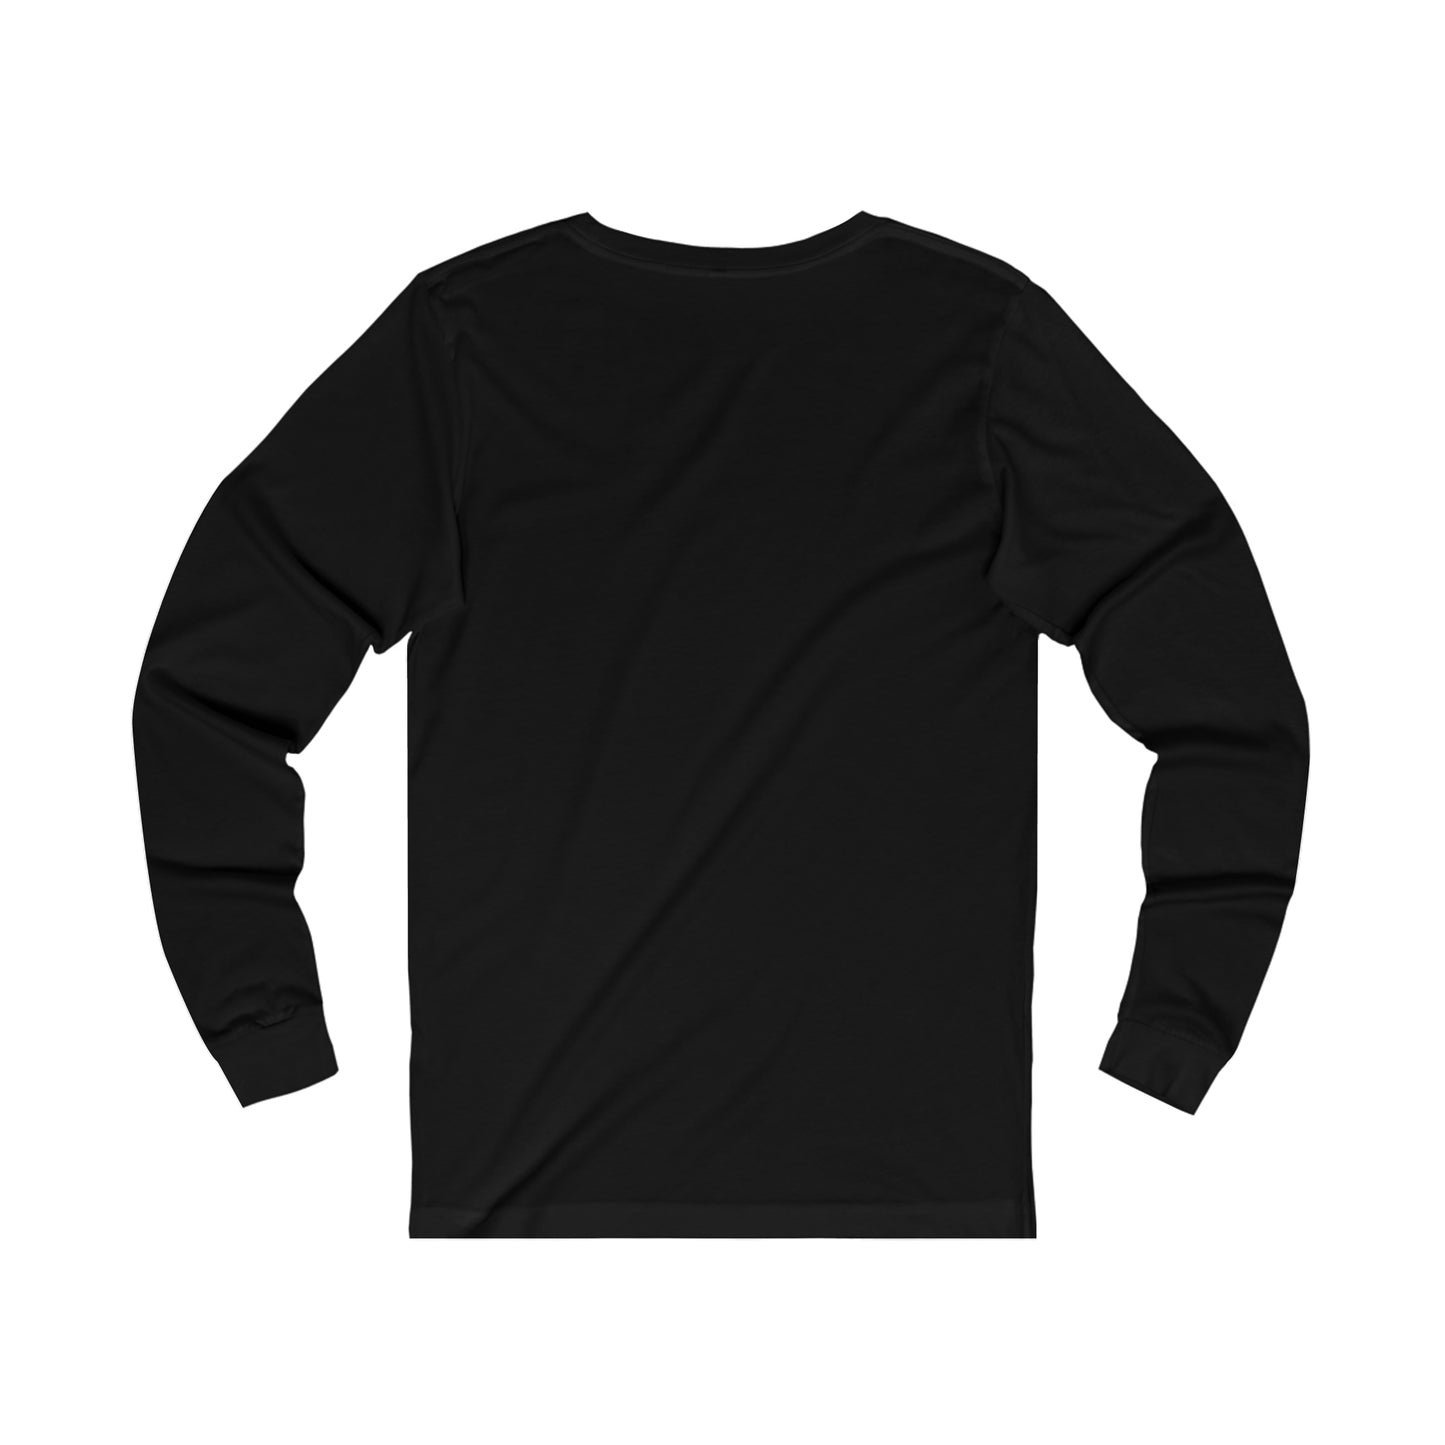 The Sins of Silas - Unisex Jersey Long Sleeve Tee